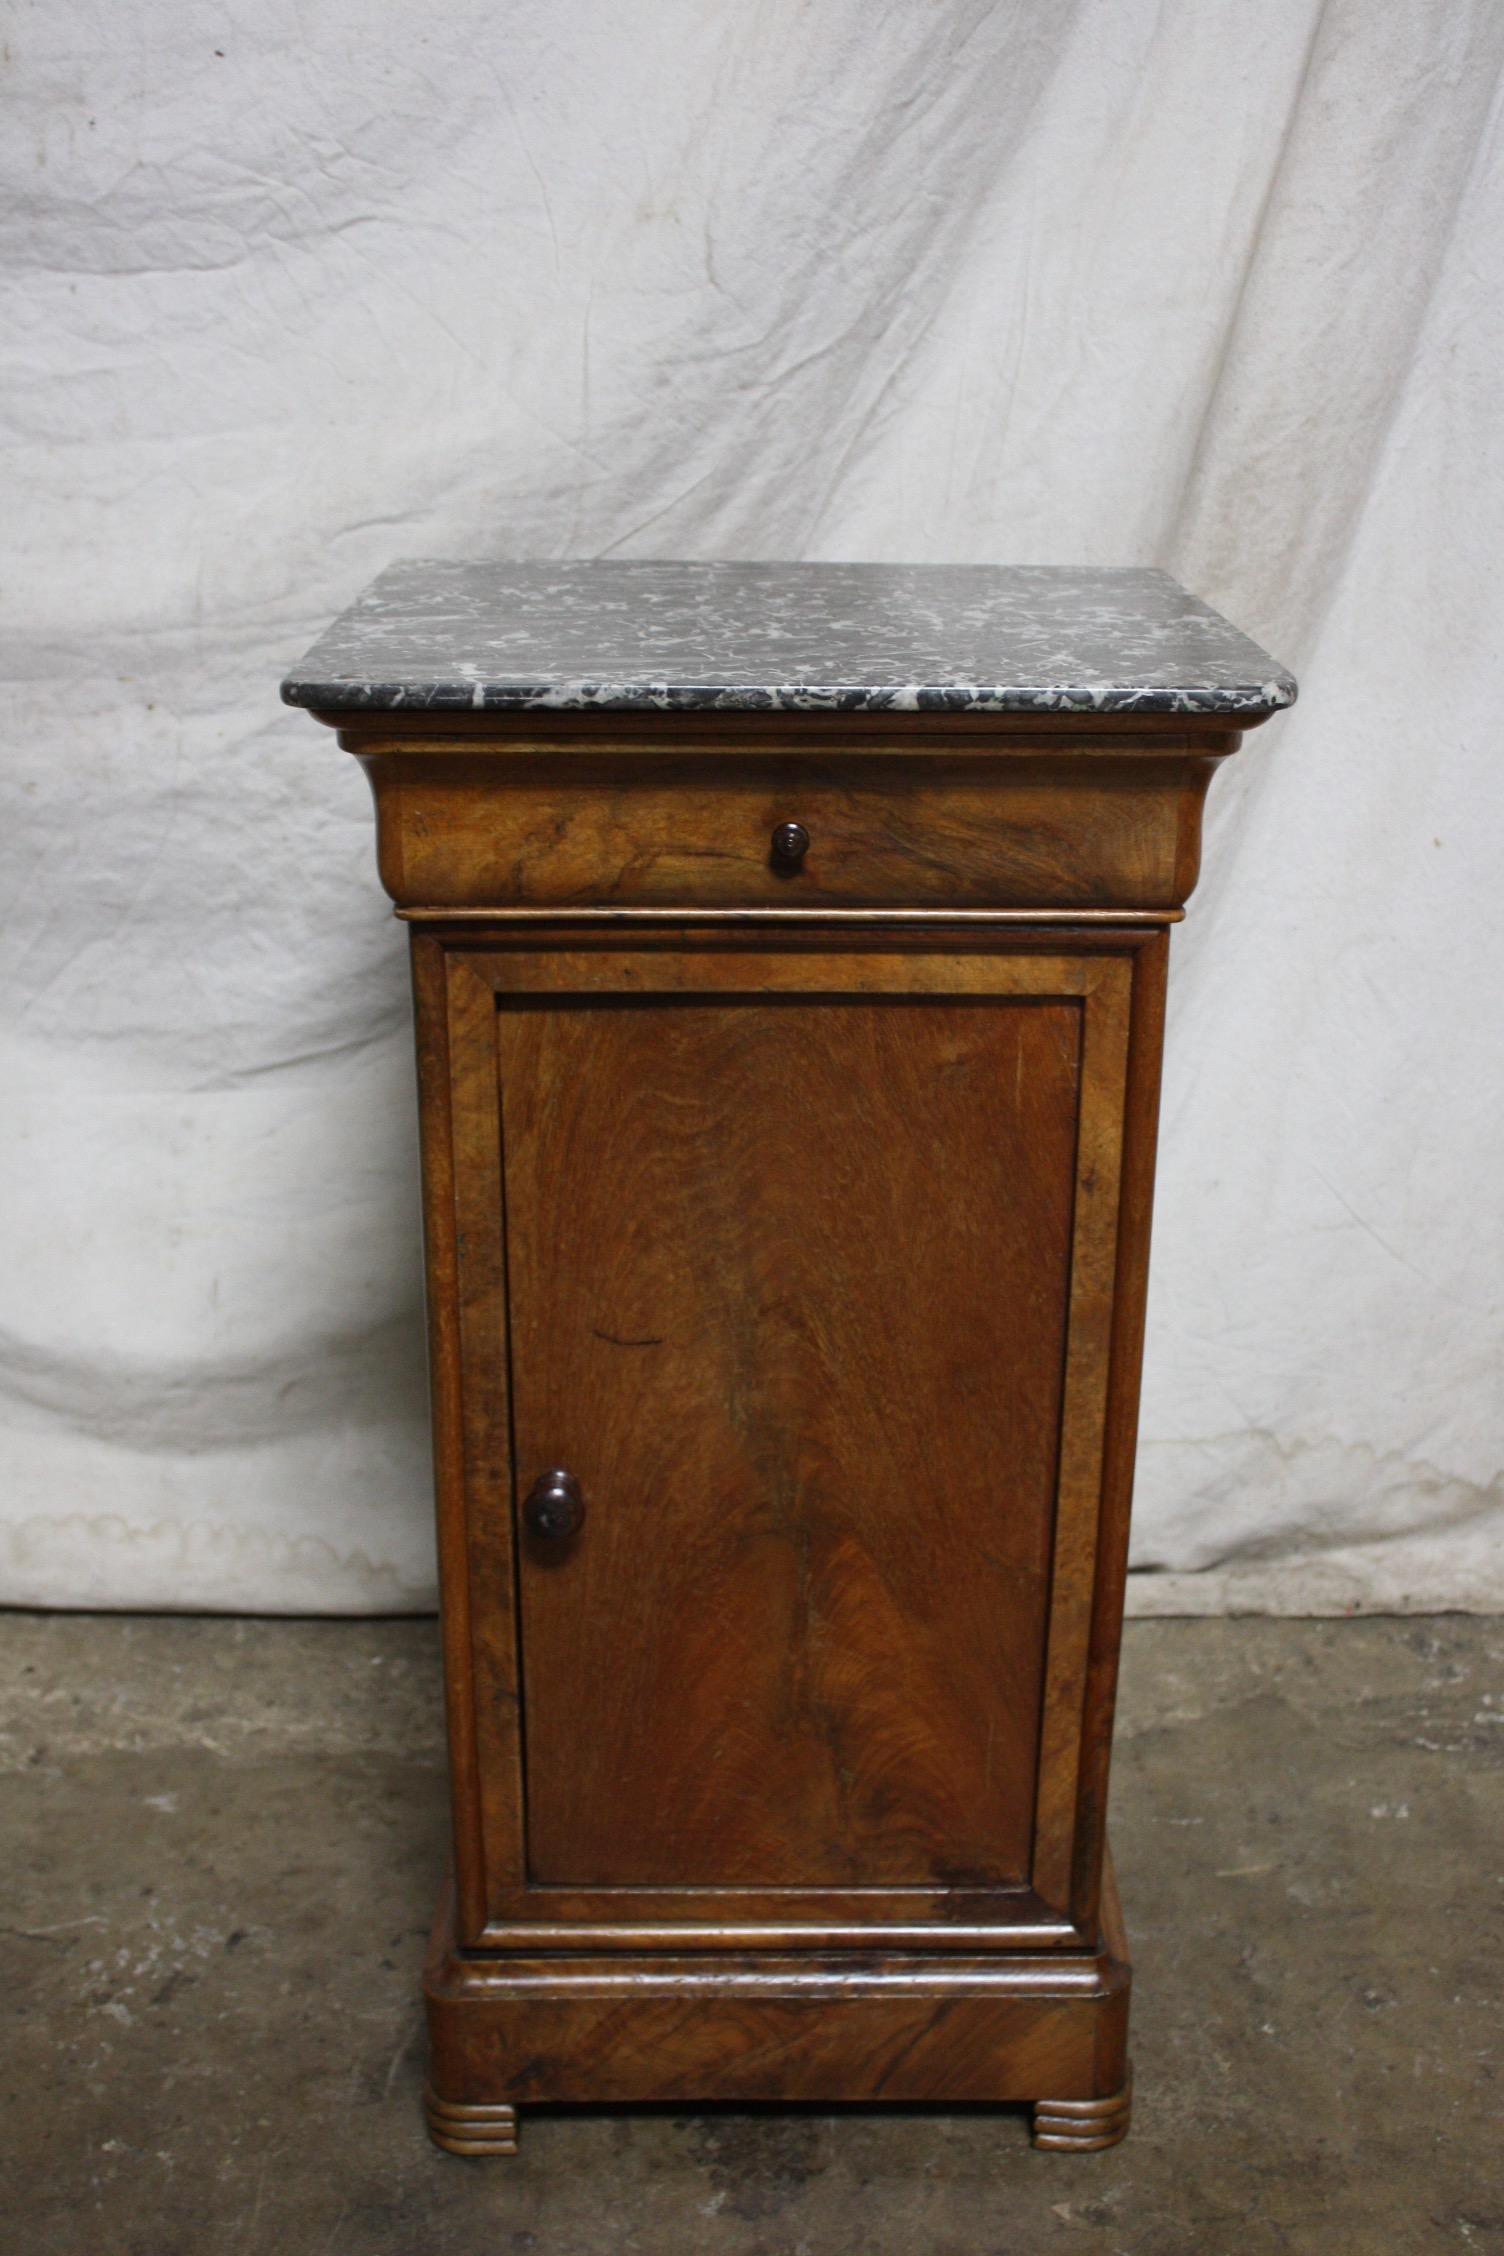 Very nice and simple line of the Louis-Philippe Period, attracts the eyes by its simplicity. Those furniture in the 19th century in France was used as night stands.